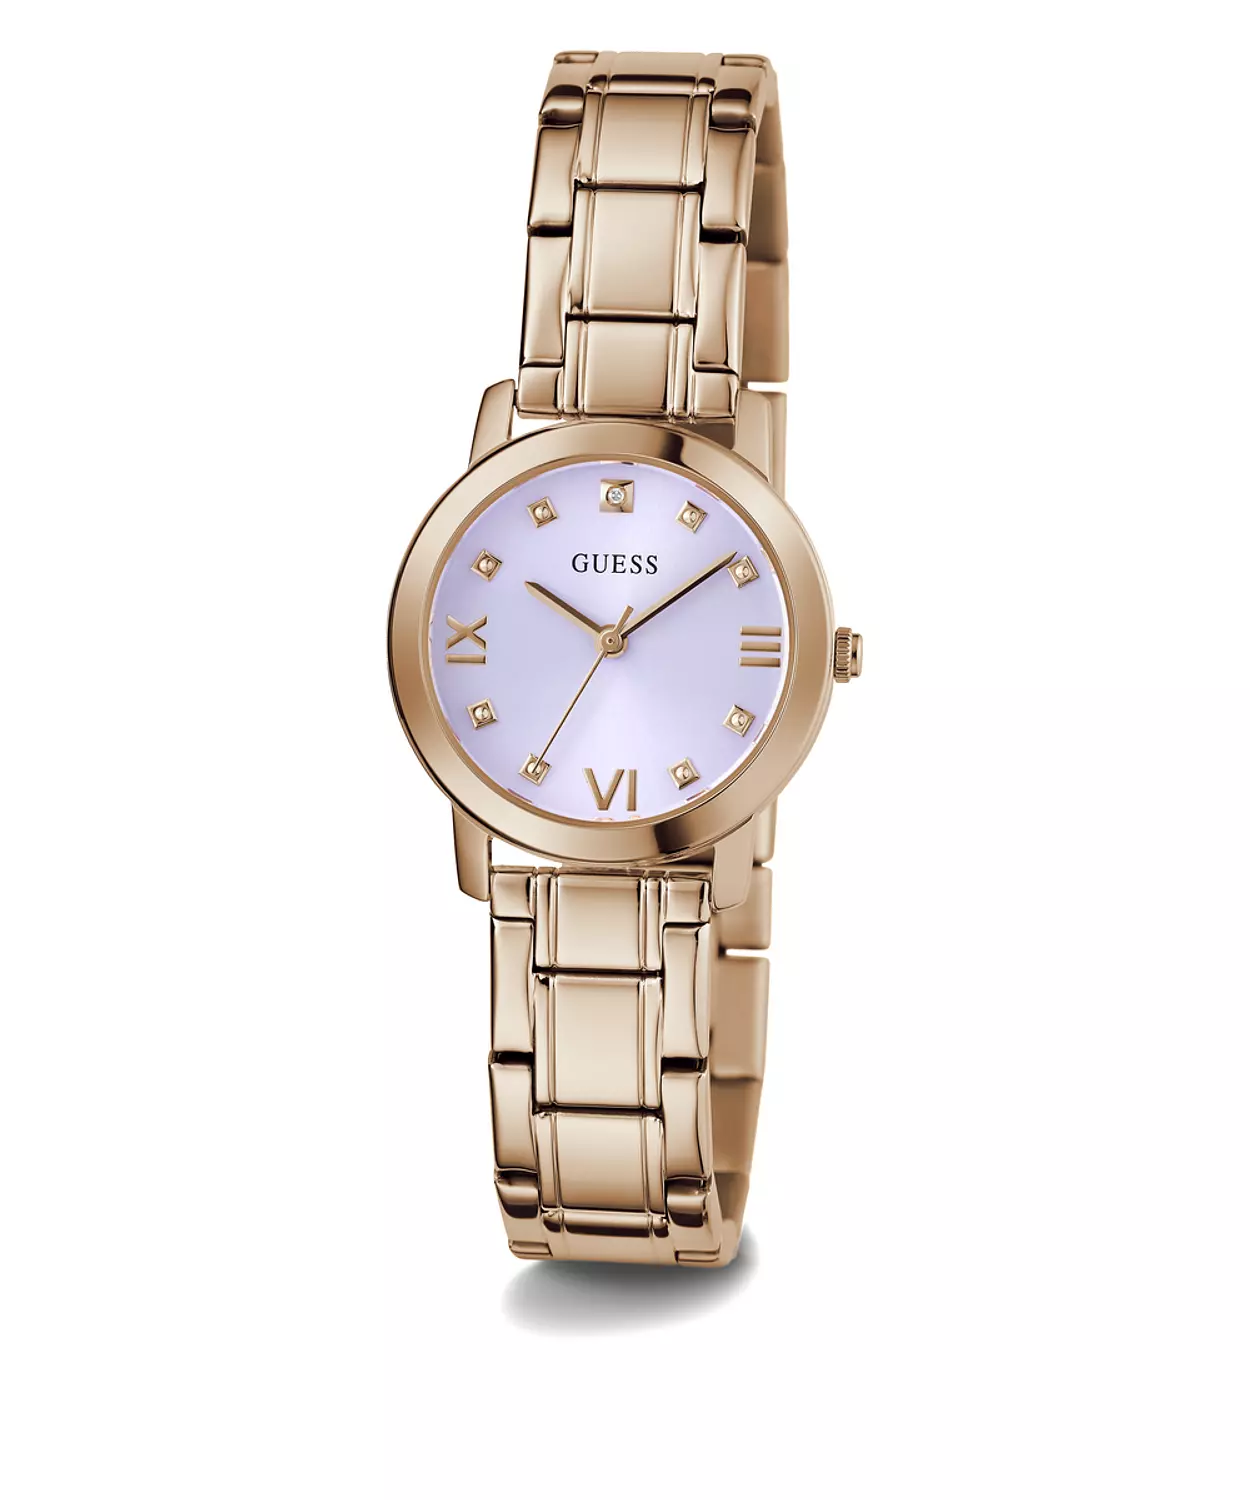 GUESS GW0532L3 ANALOG WATCH For Women Round Shape Rose Gold Stainless Steel Polished Bracelet 1